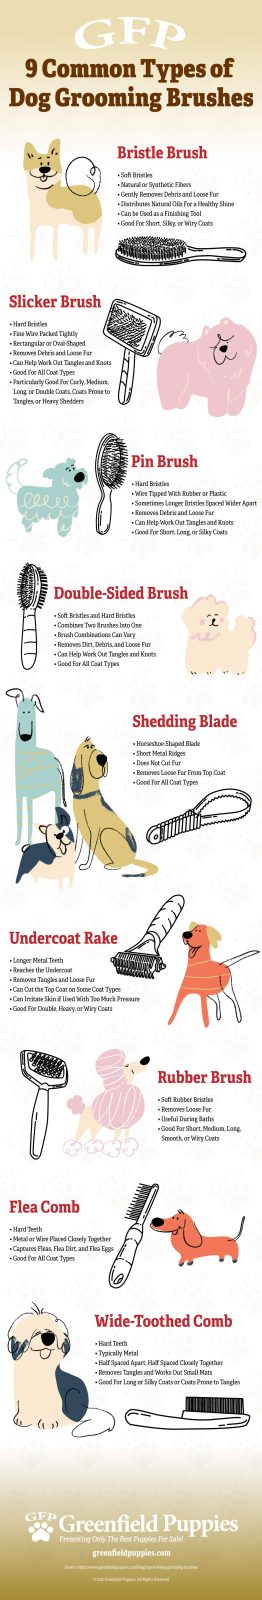 Common Types of Dog Grooming Brushes - Infographic by Greenfield Puppies